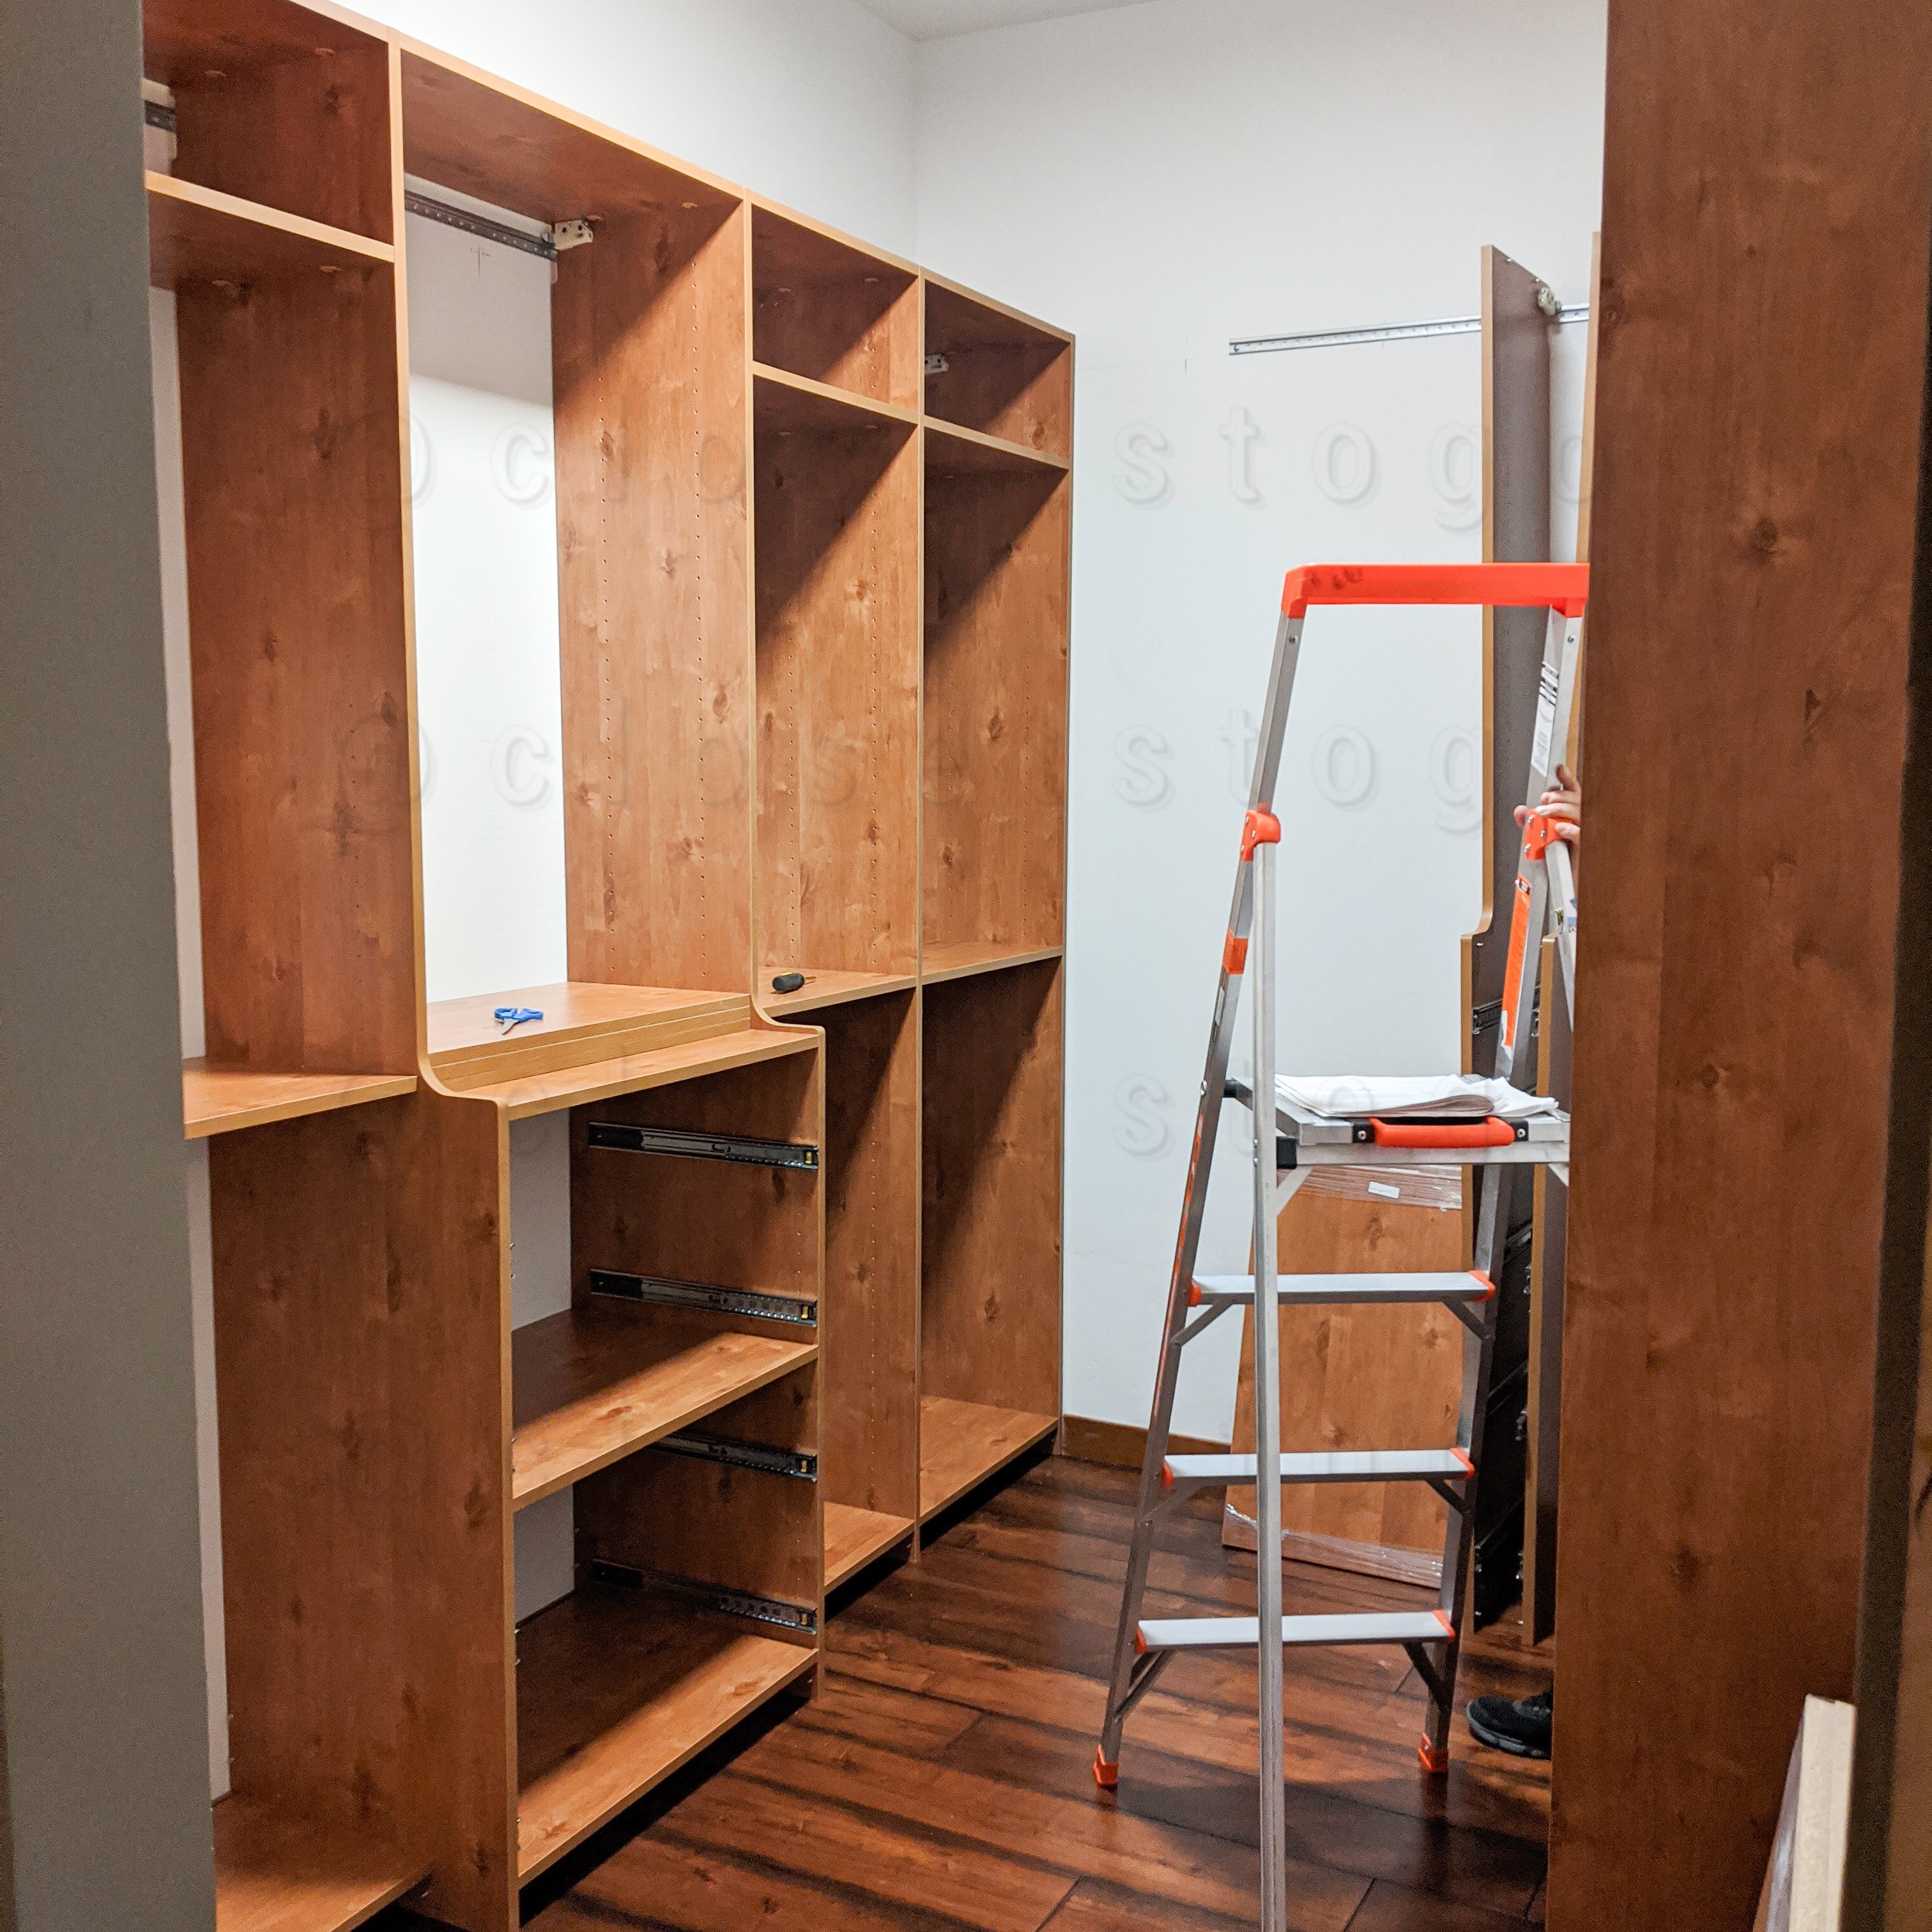 The closet install process with new storage medium hang and shelves